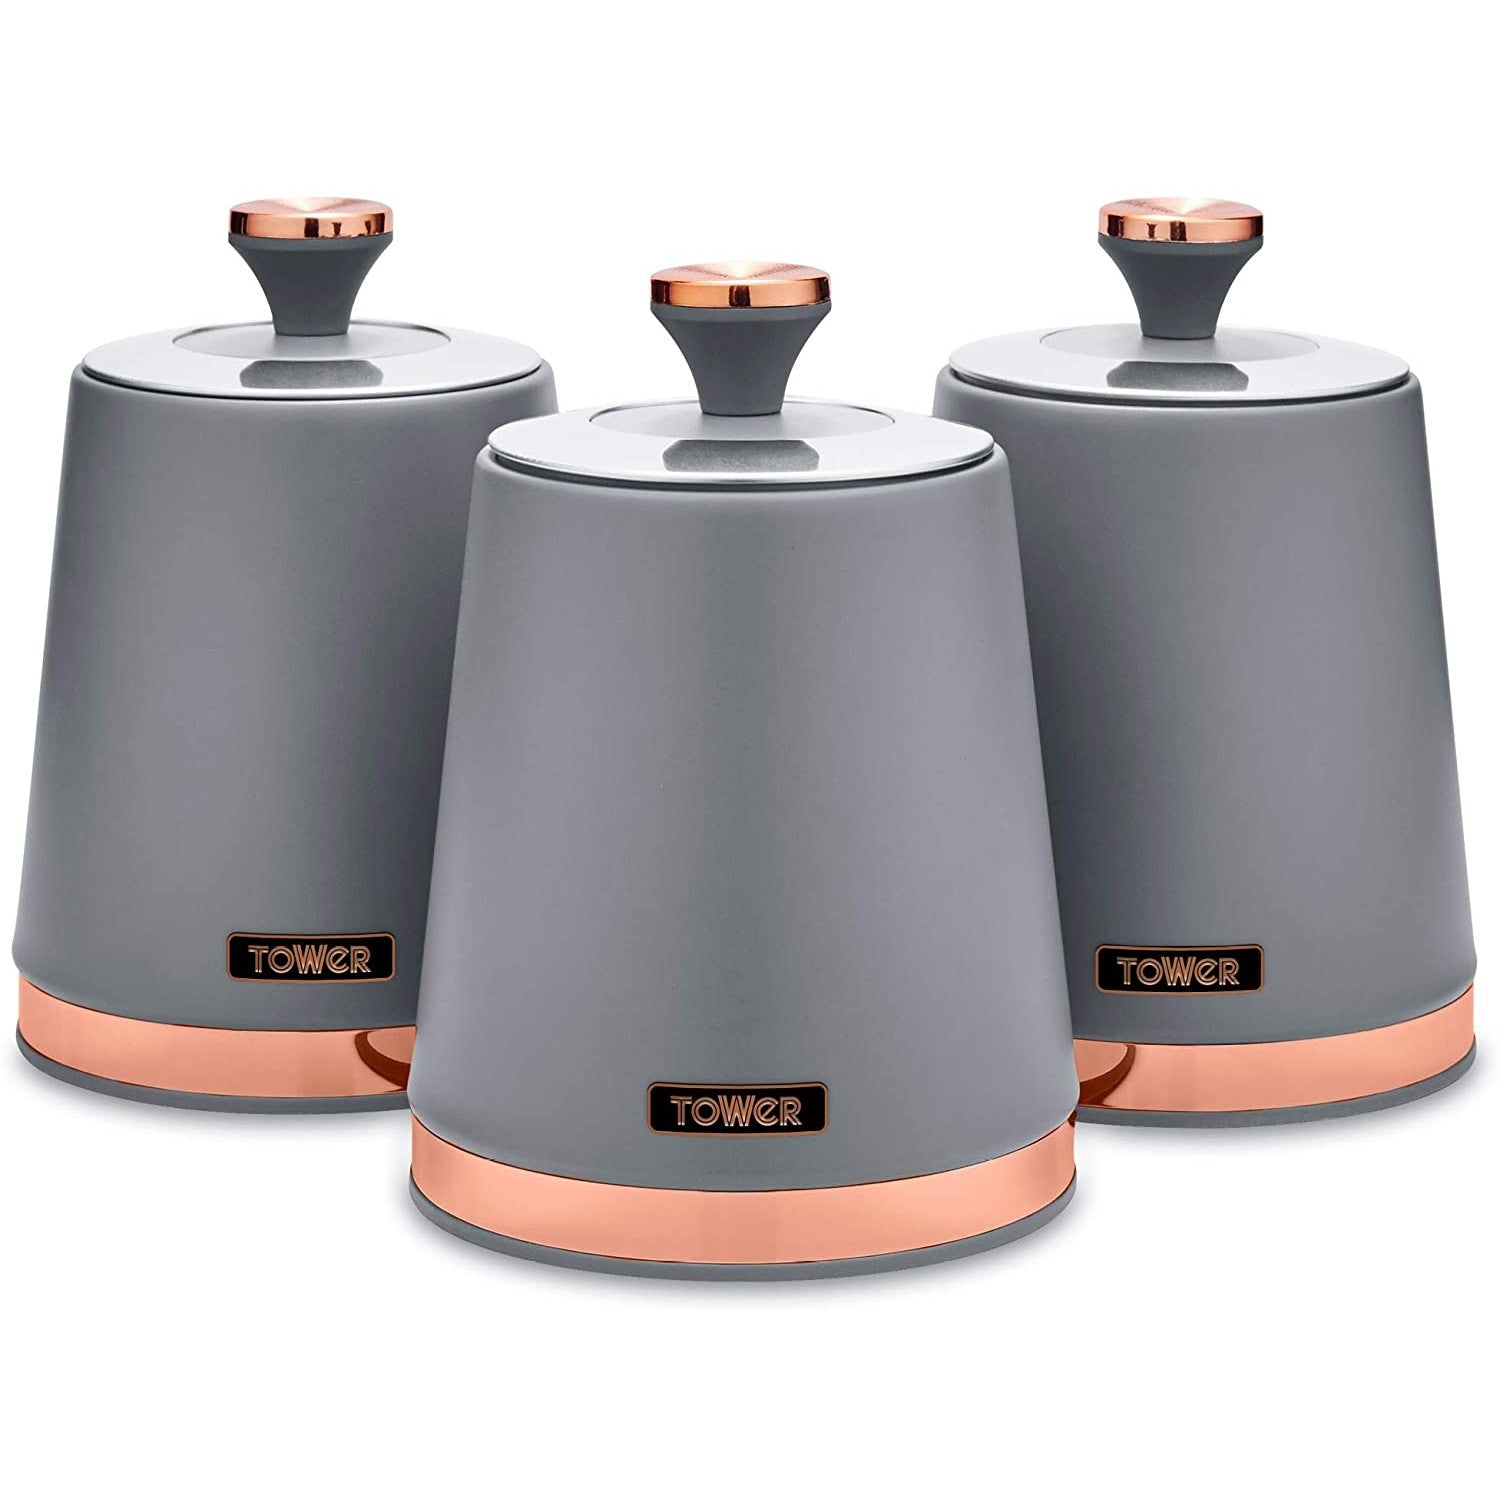 Tower Cavaletto Set of 3 Grey Canisters Set